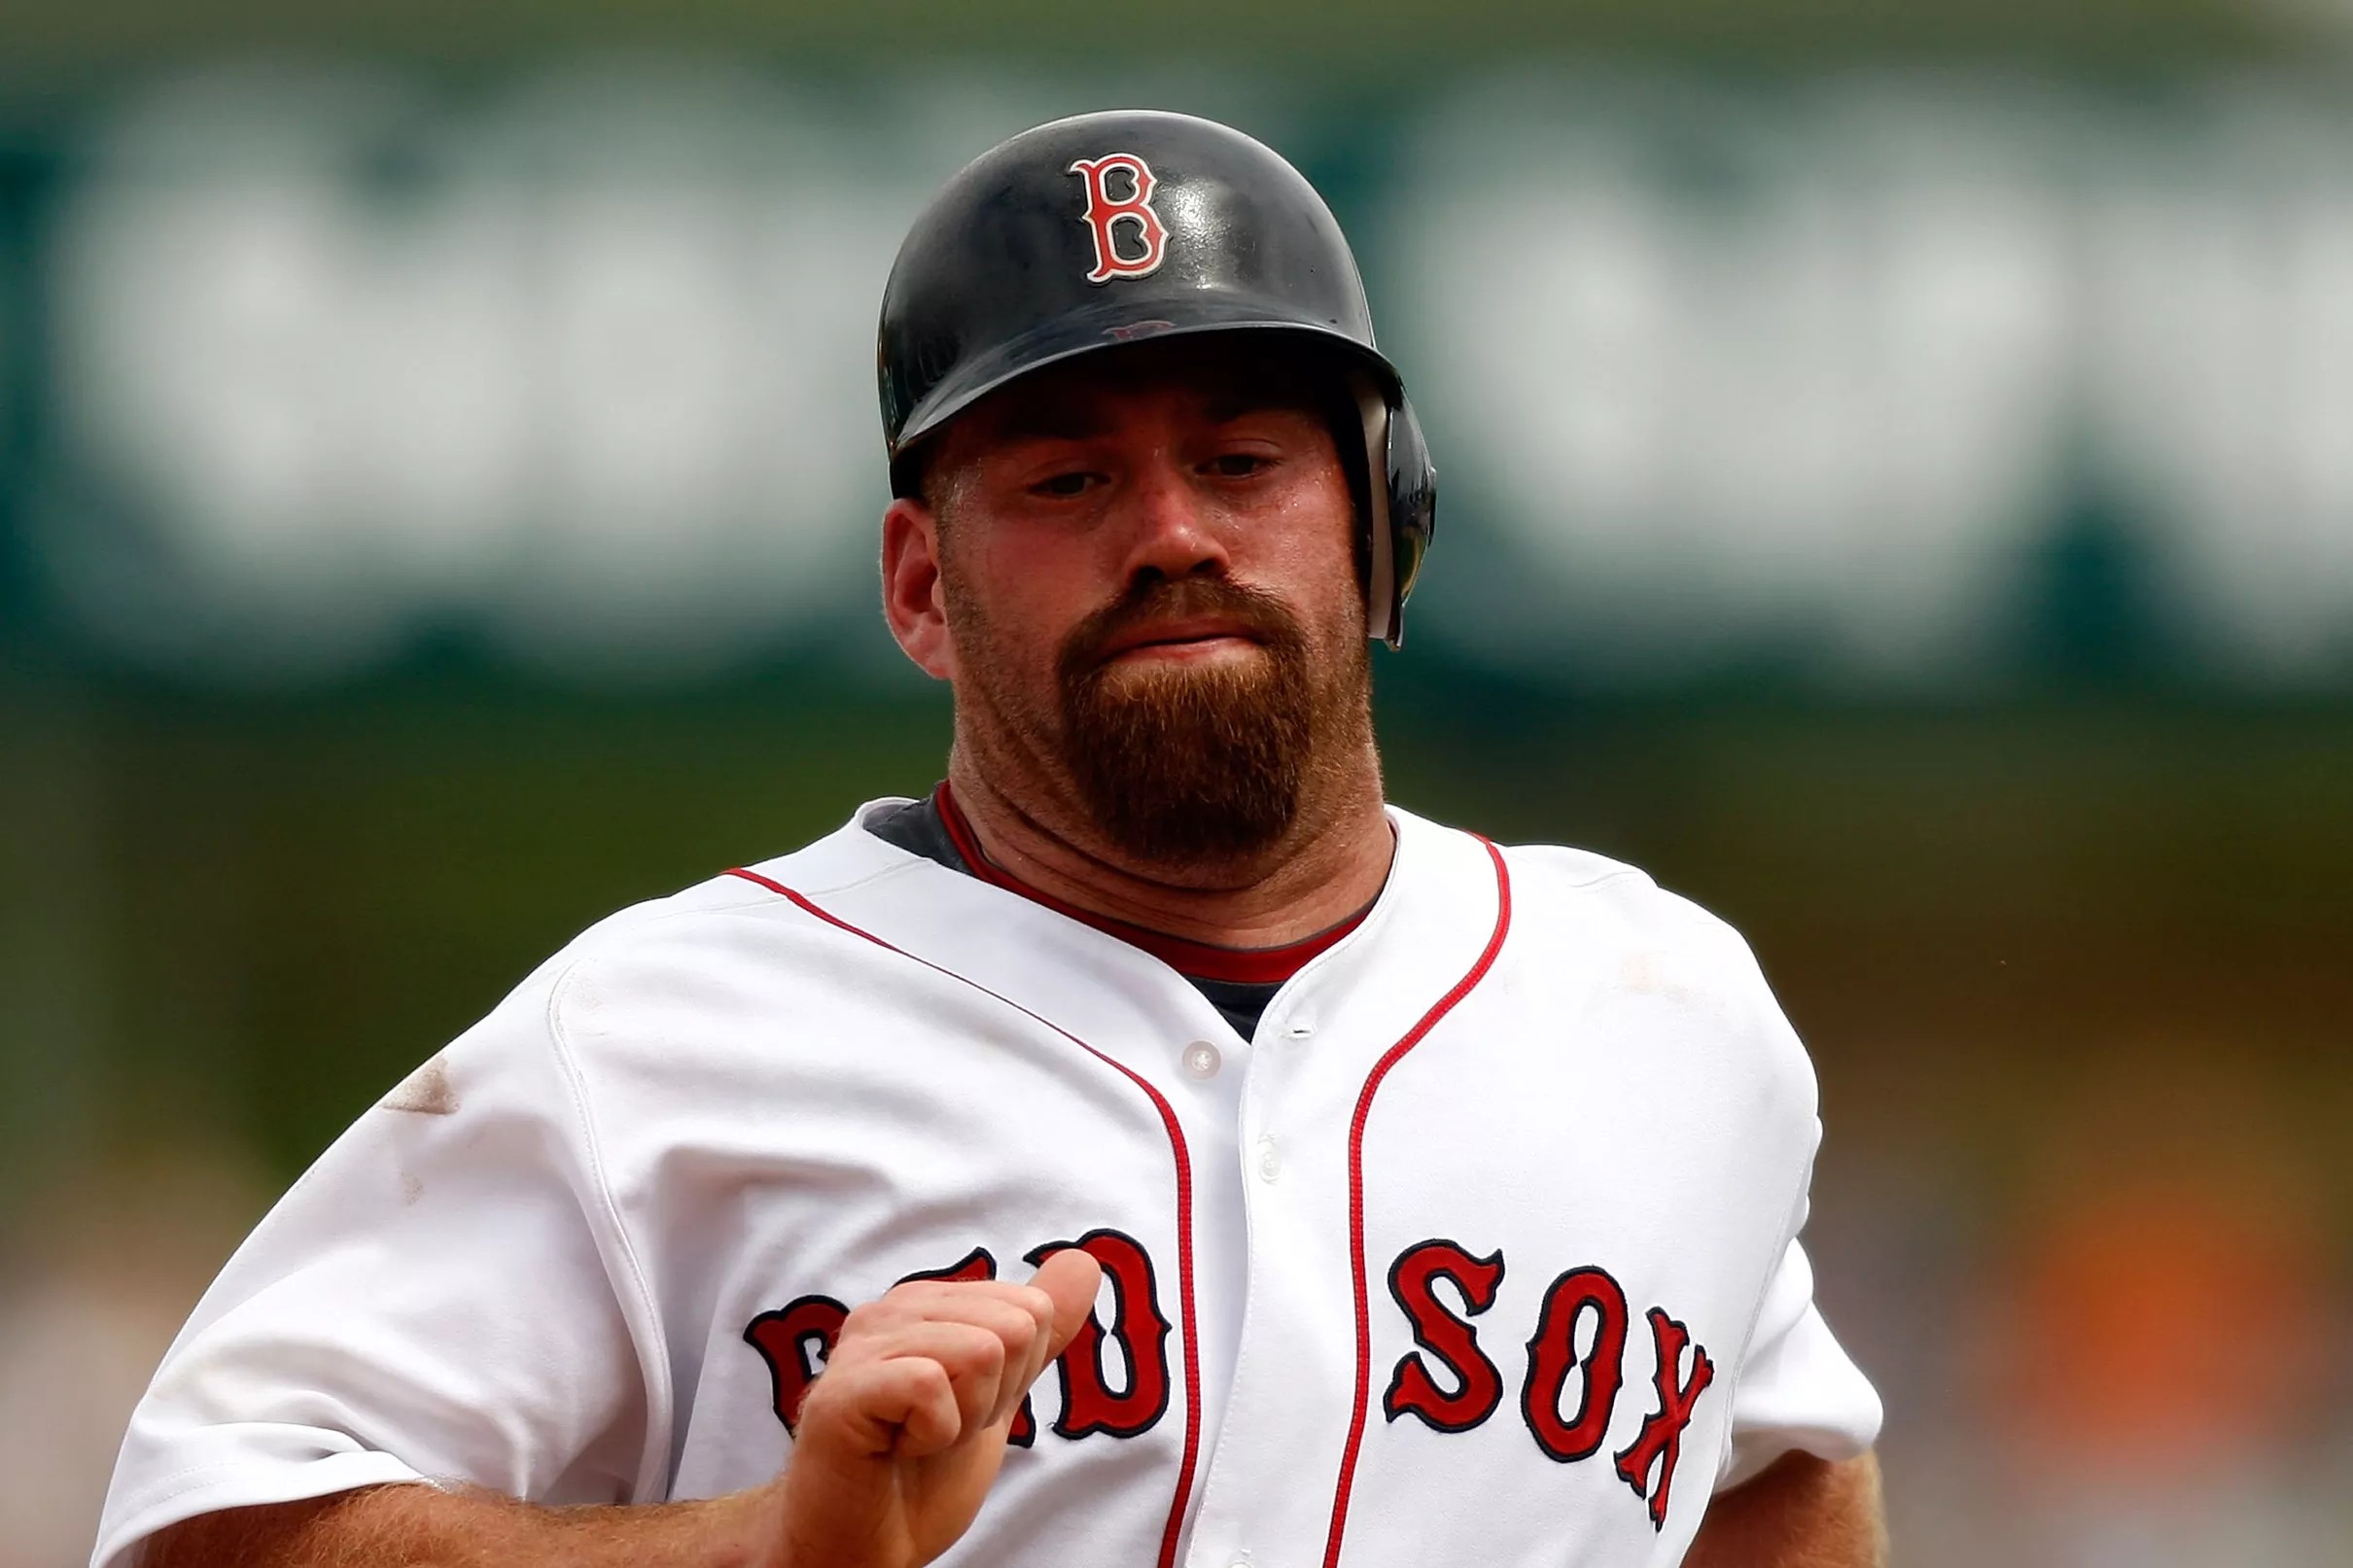 kevin youkilis college